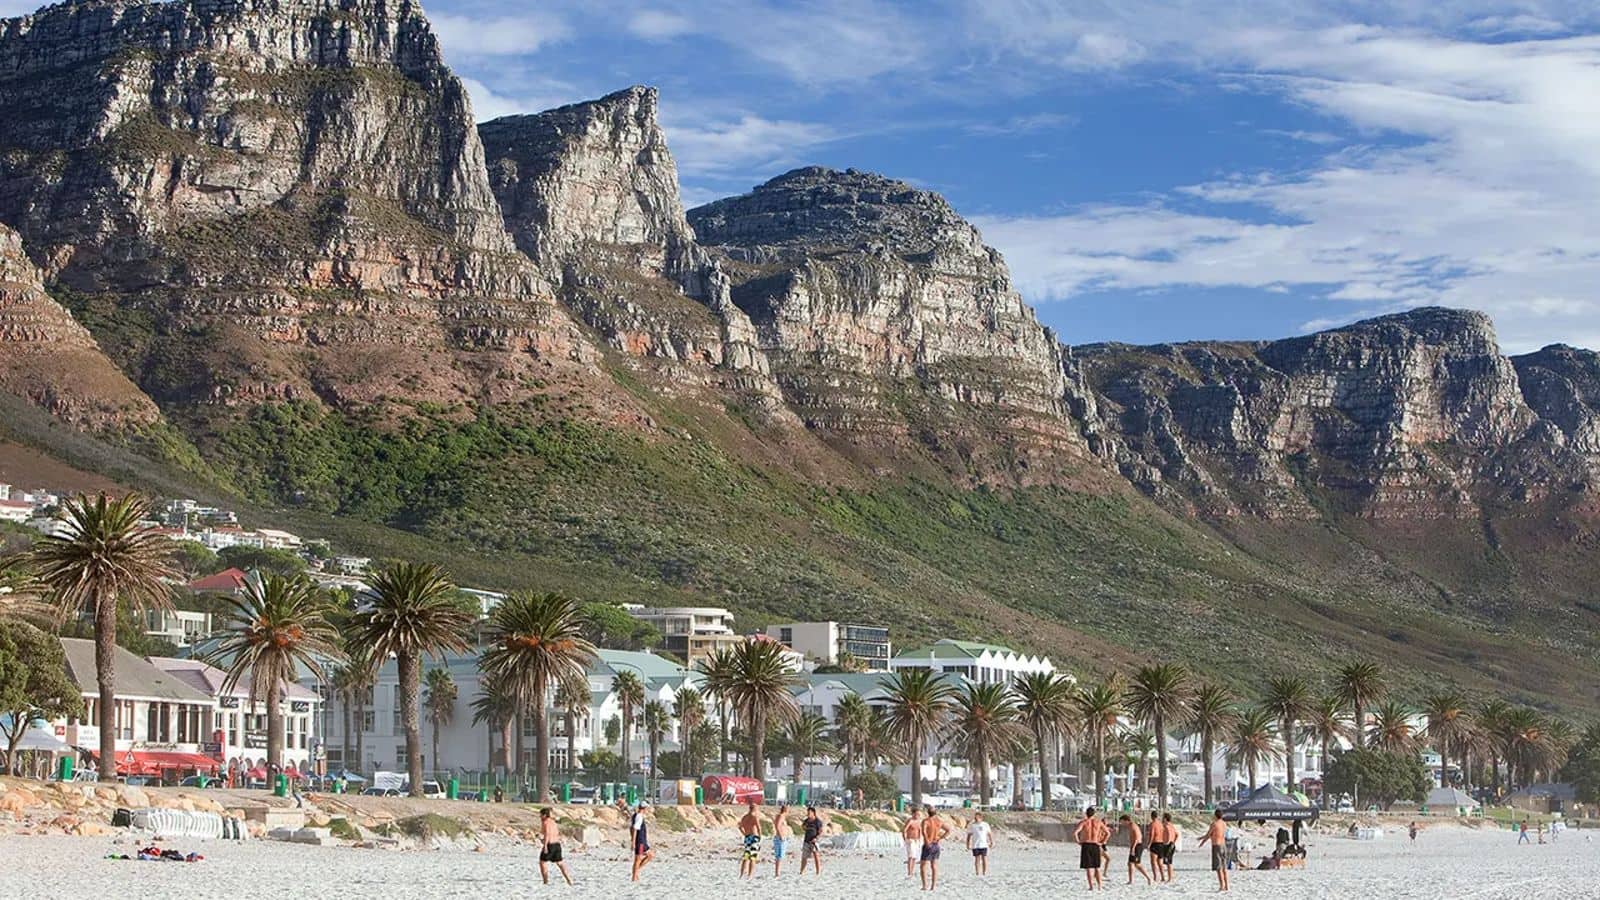 Head over to Cape Town's finest coastal gems